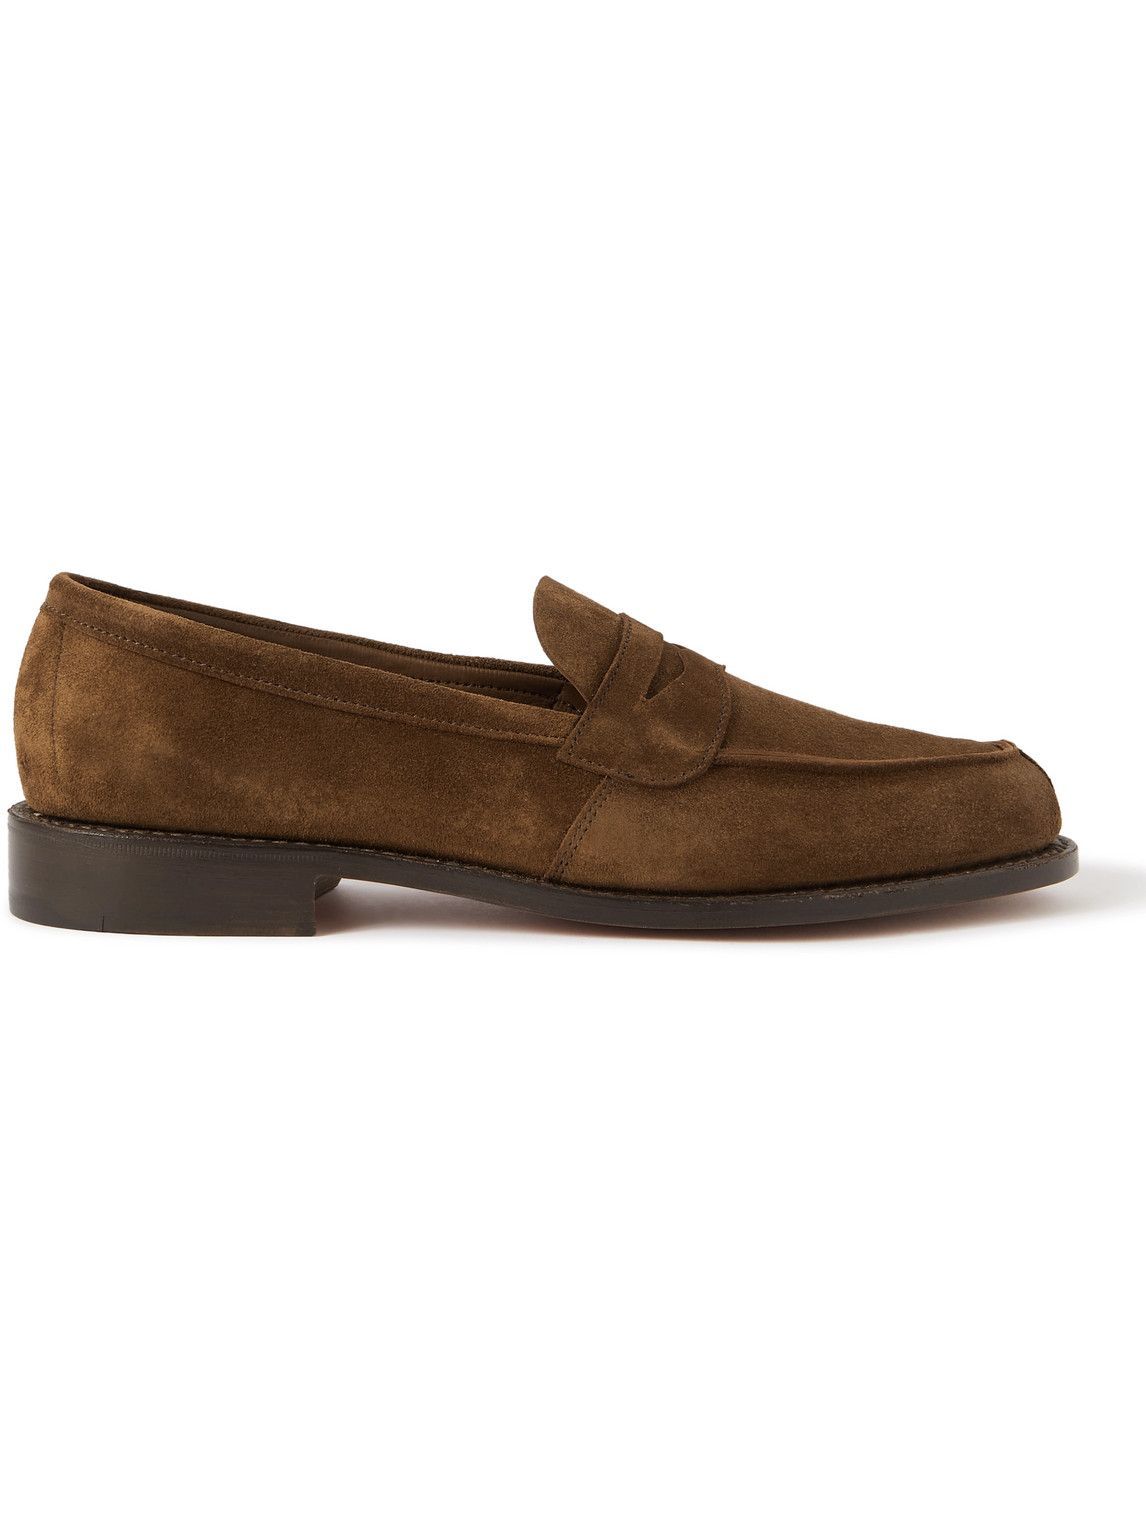 Tricker's - Maine Suede Penny Loafers - Brown Tricker's